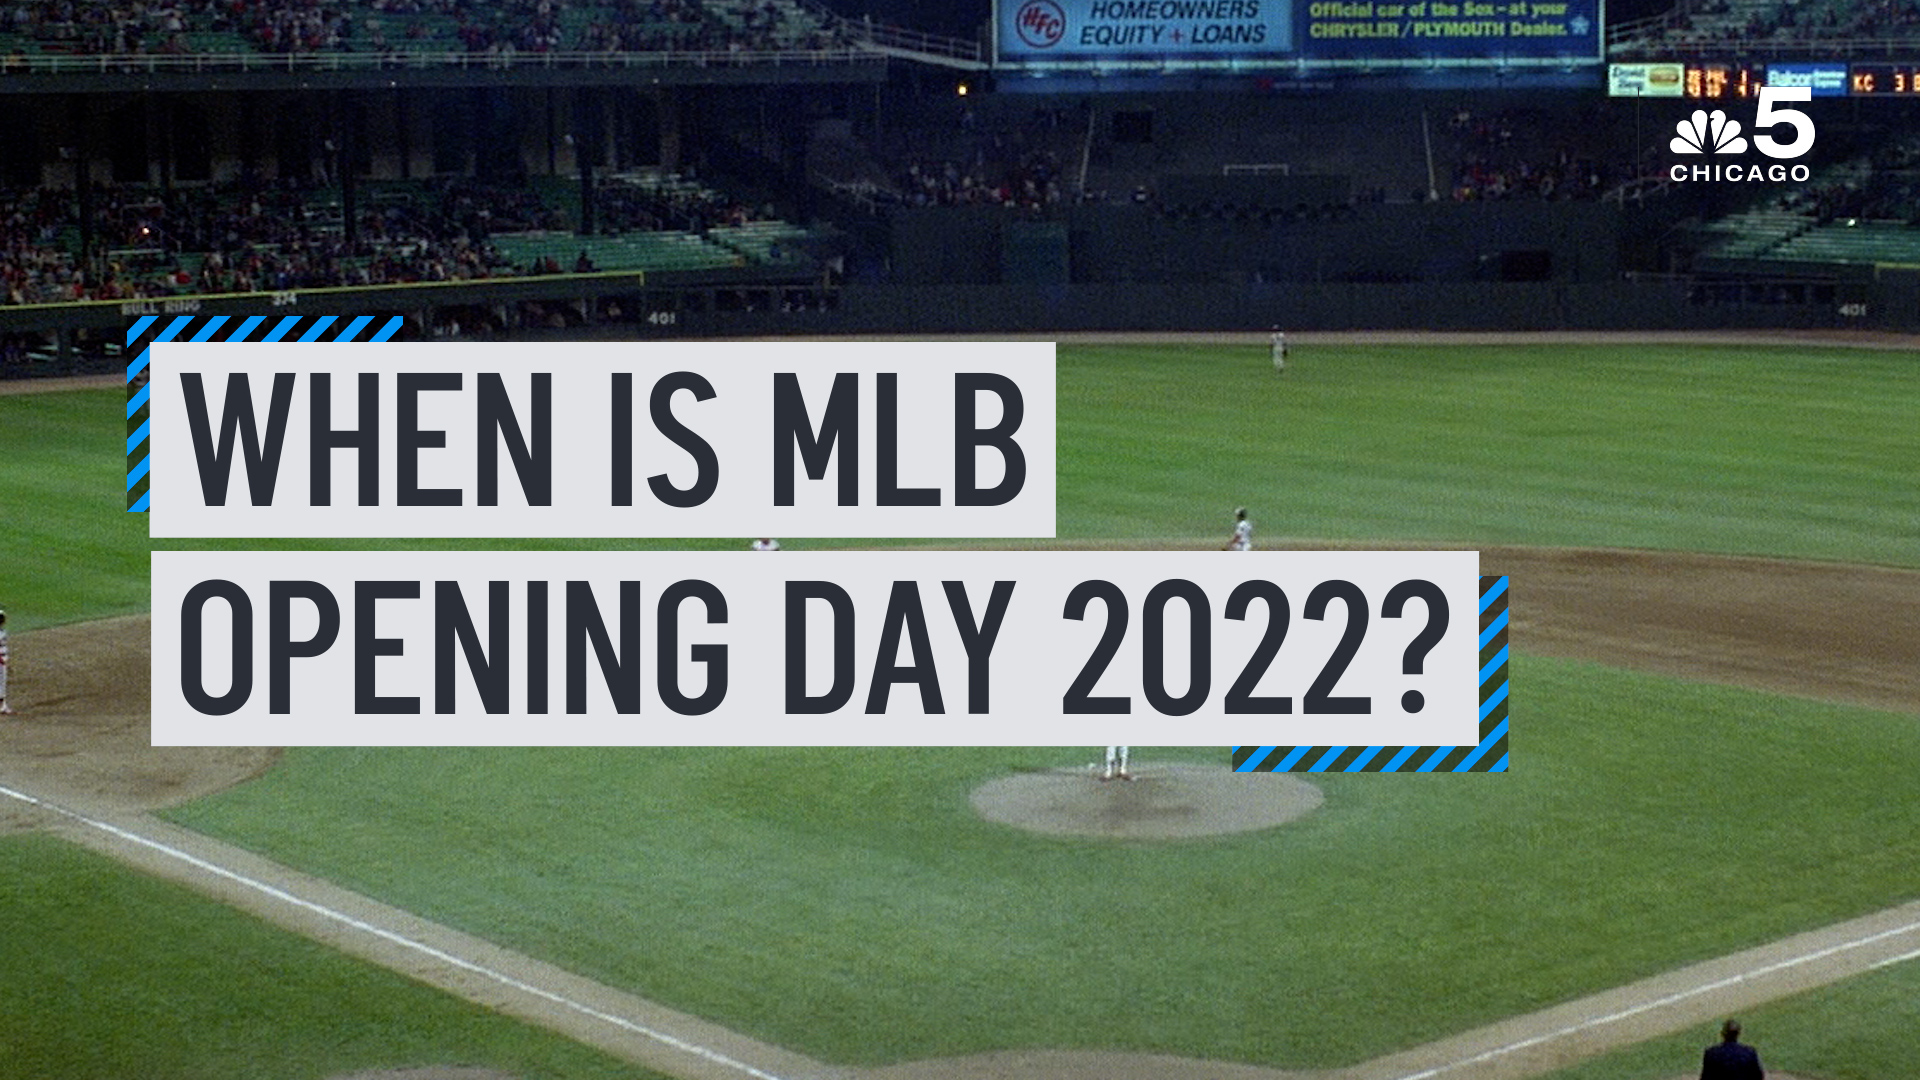 When is MLB opening day 2022?